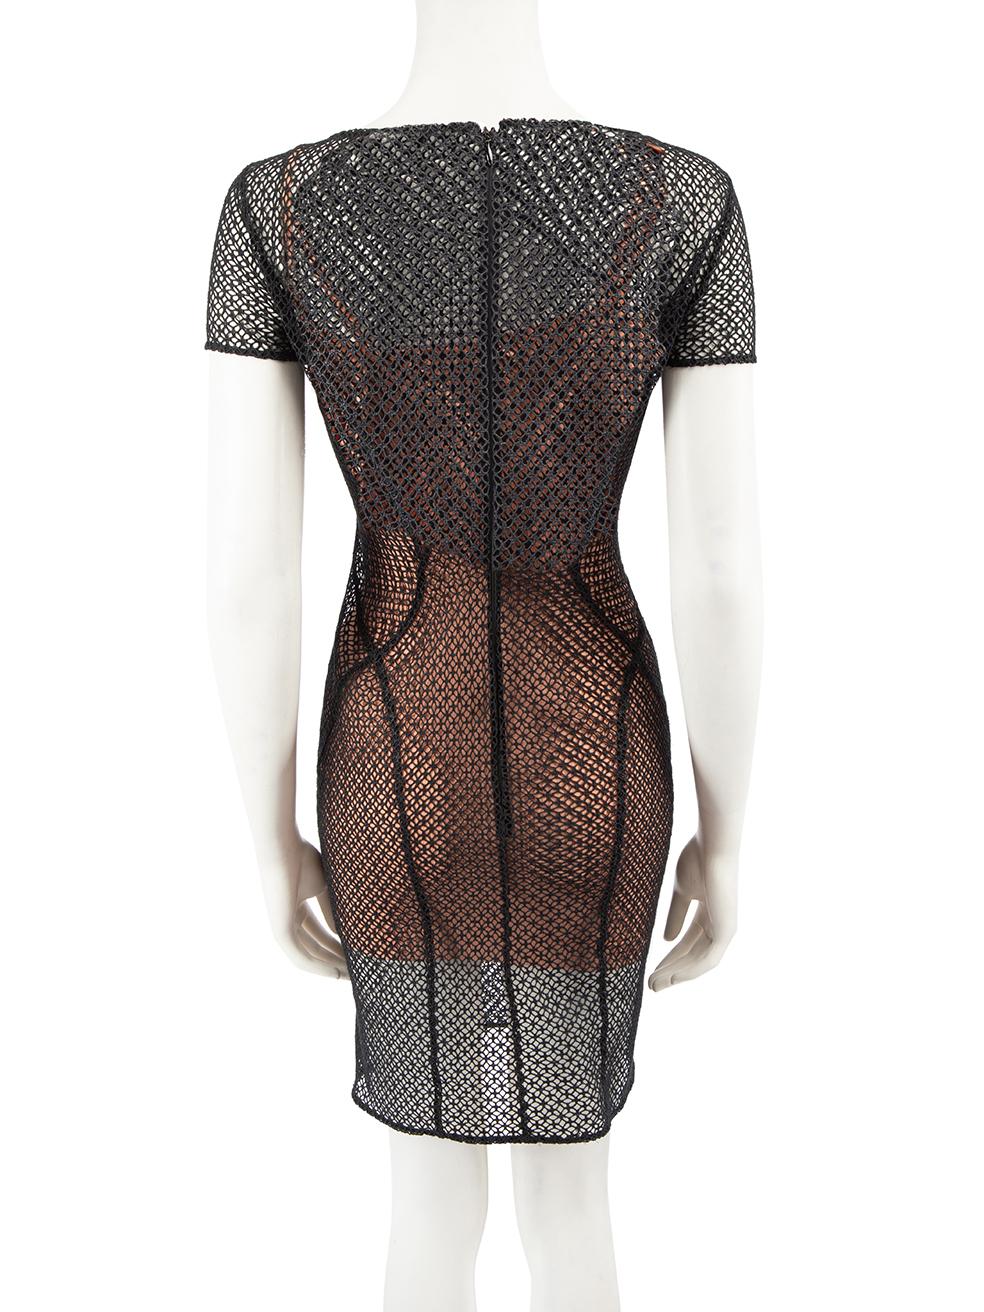 Alaïa Pierre Mantoux for Alaïa Black Lace with Slip Dress Size S In New Condition For Sale In London, GB